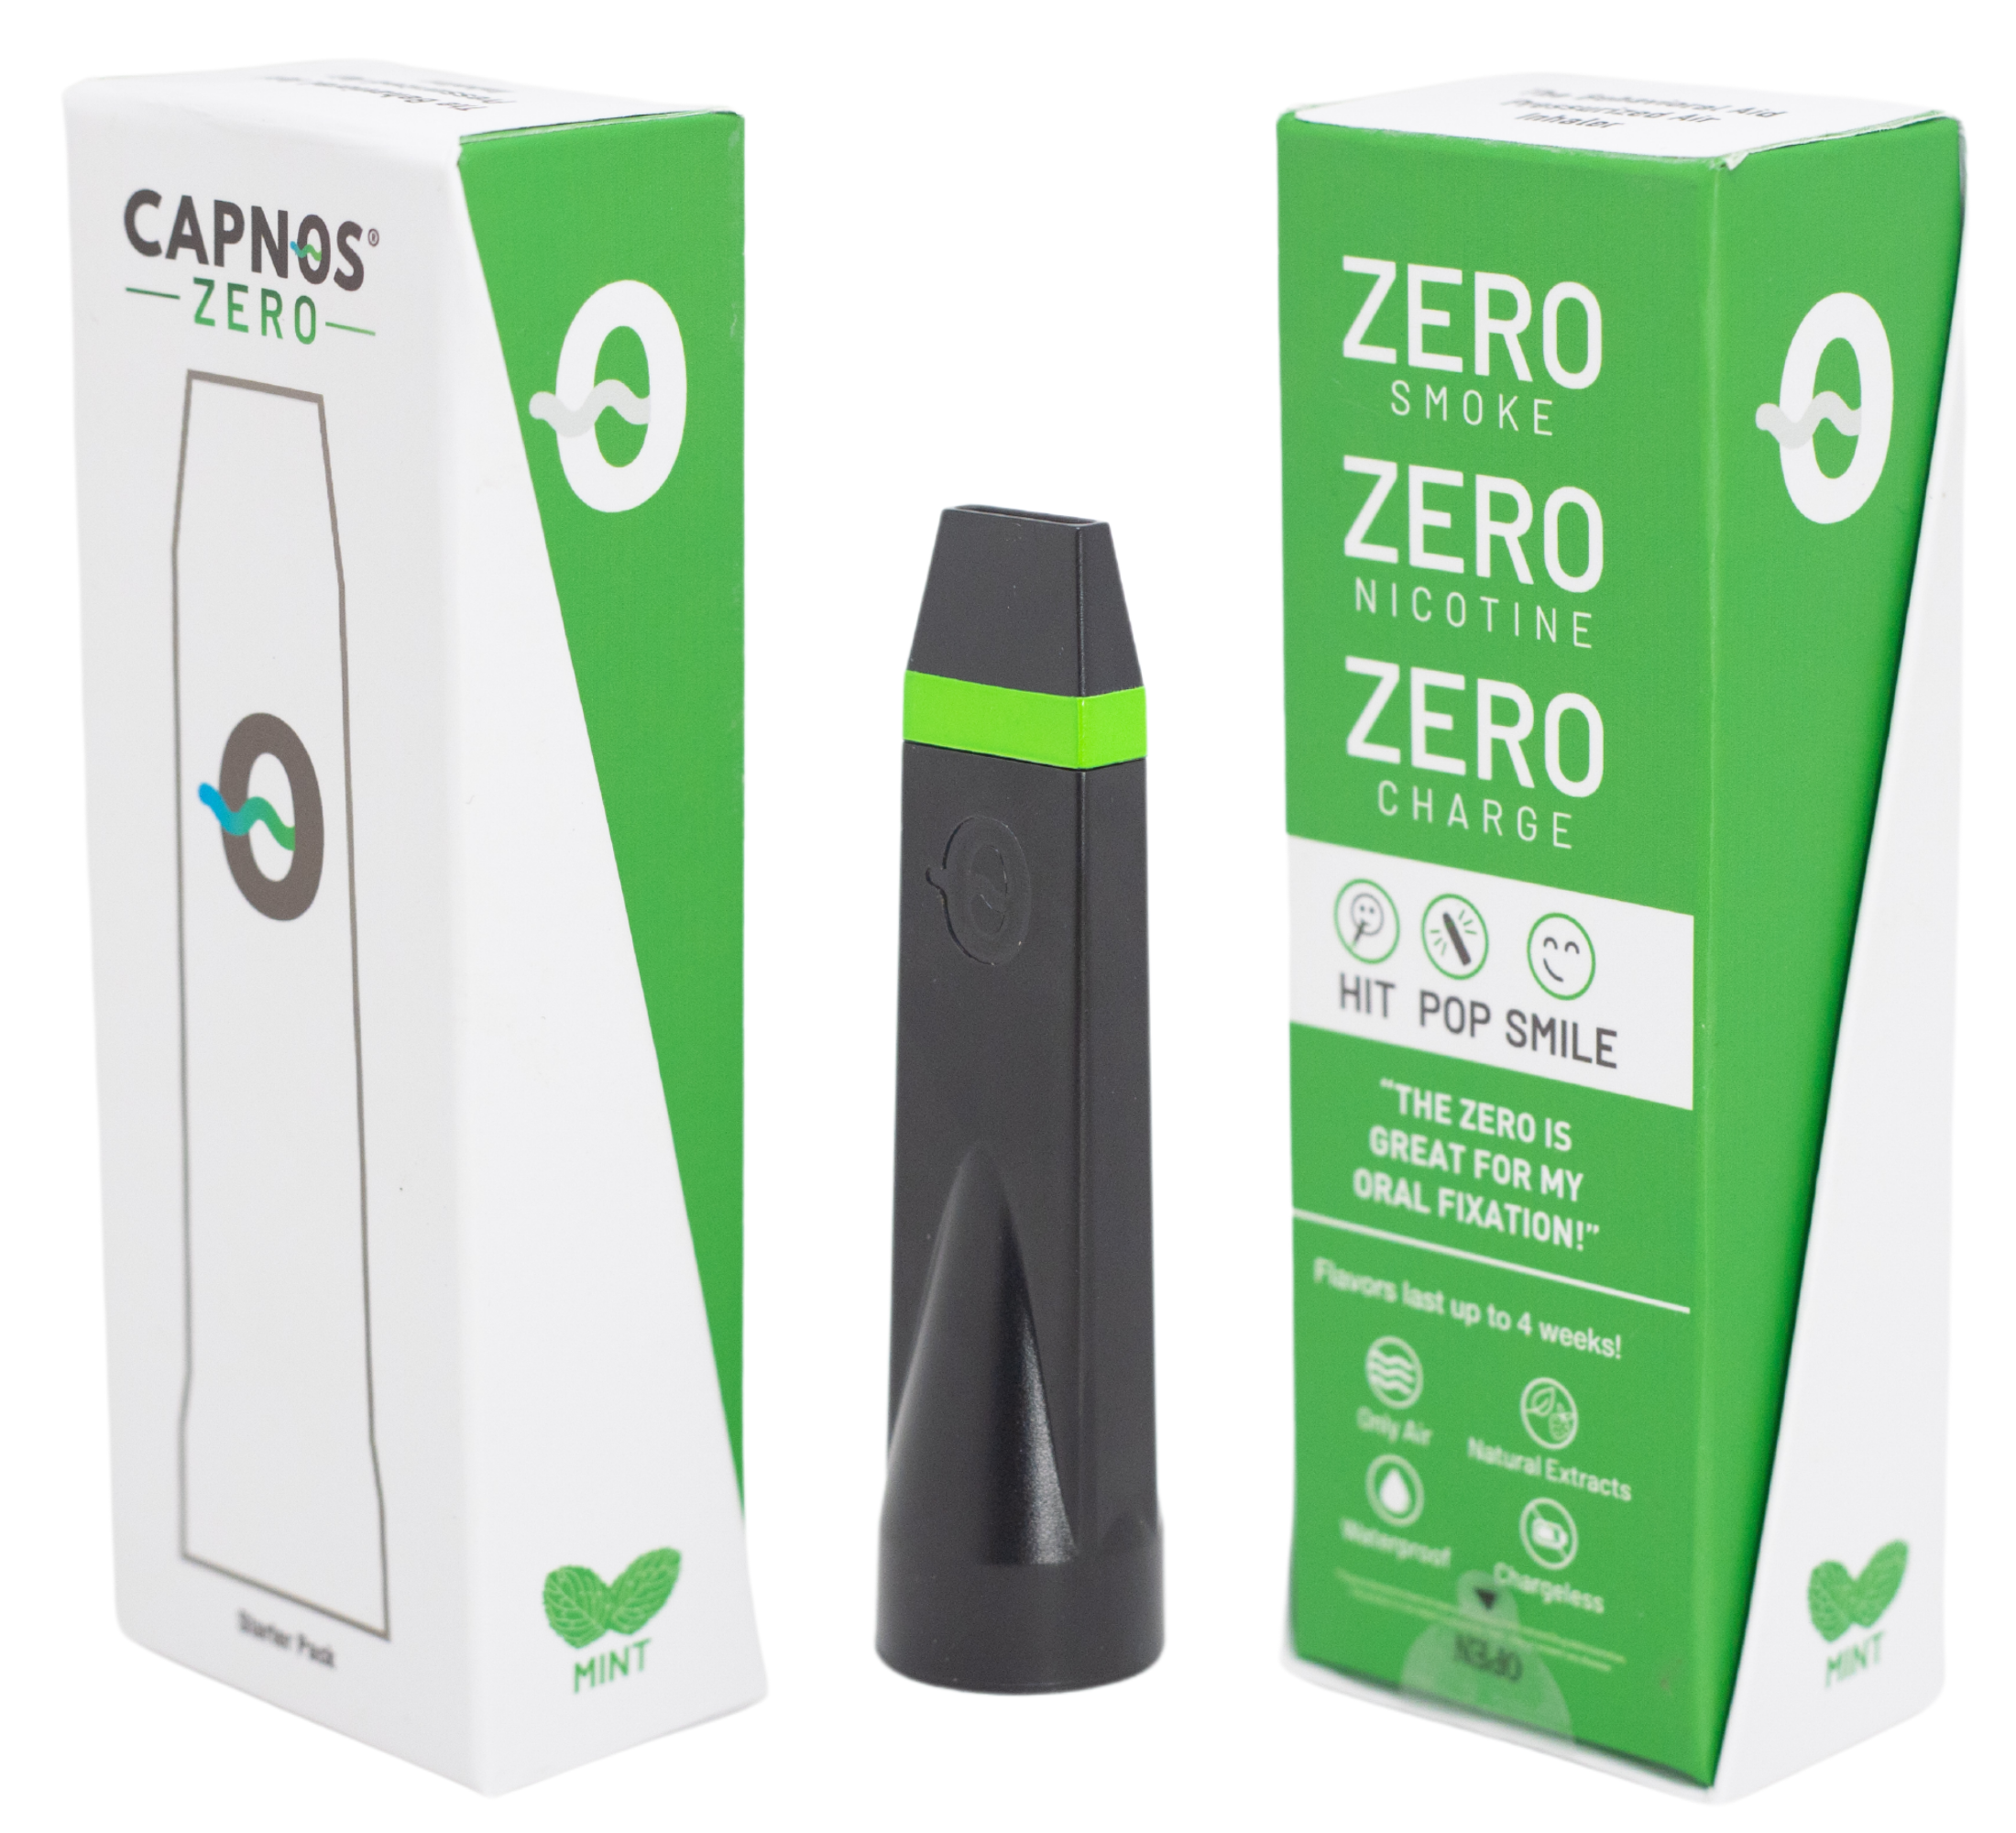 The CAPNOS ZERO and all you need to begin your journey to quitting vaping. 